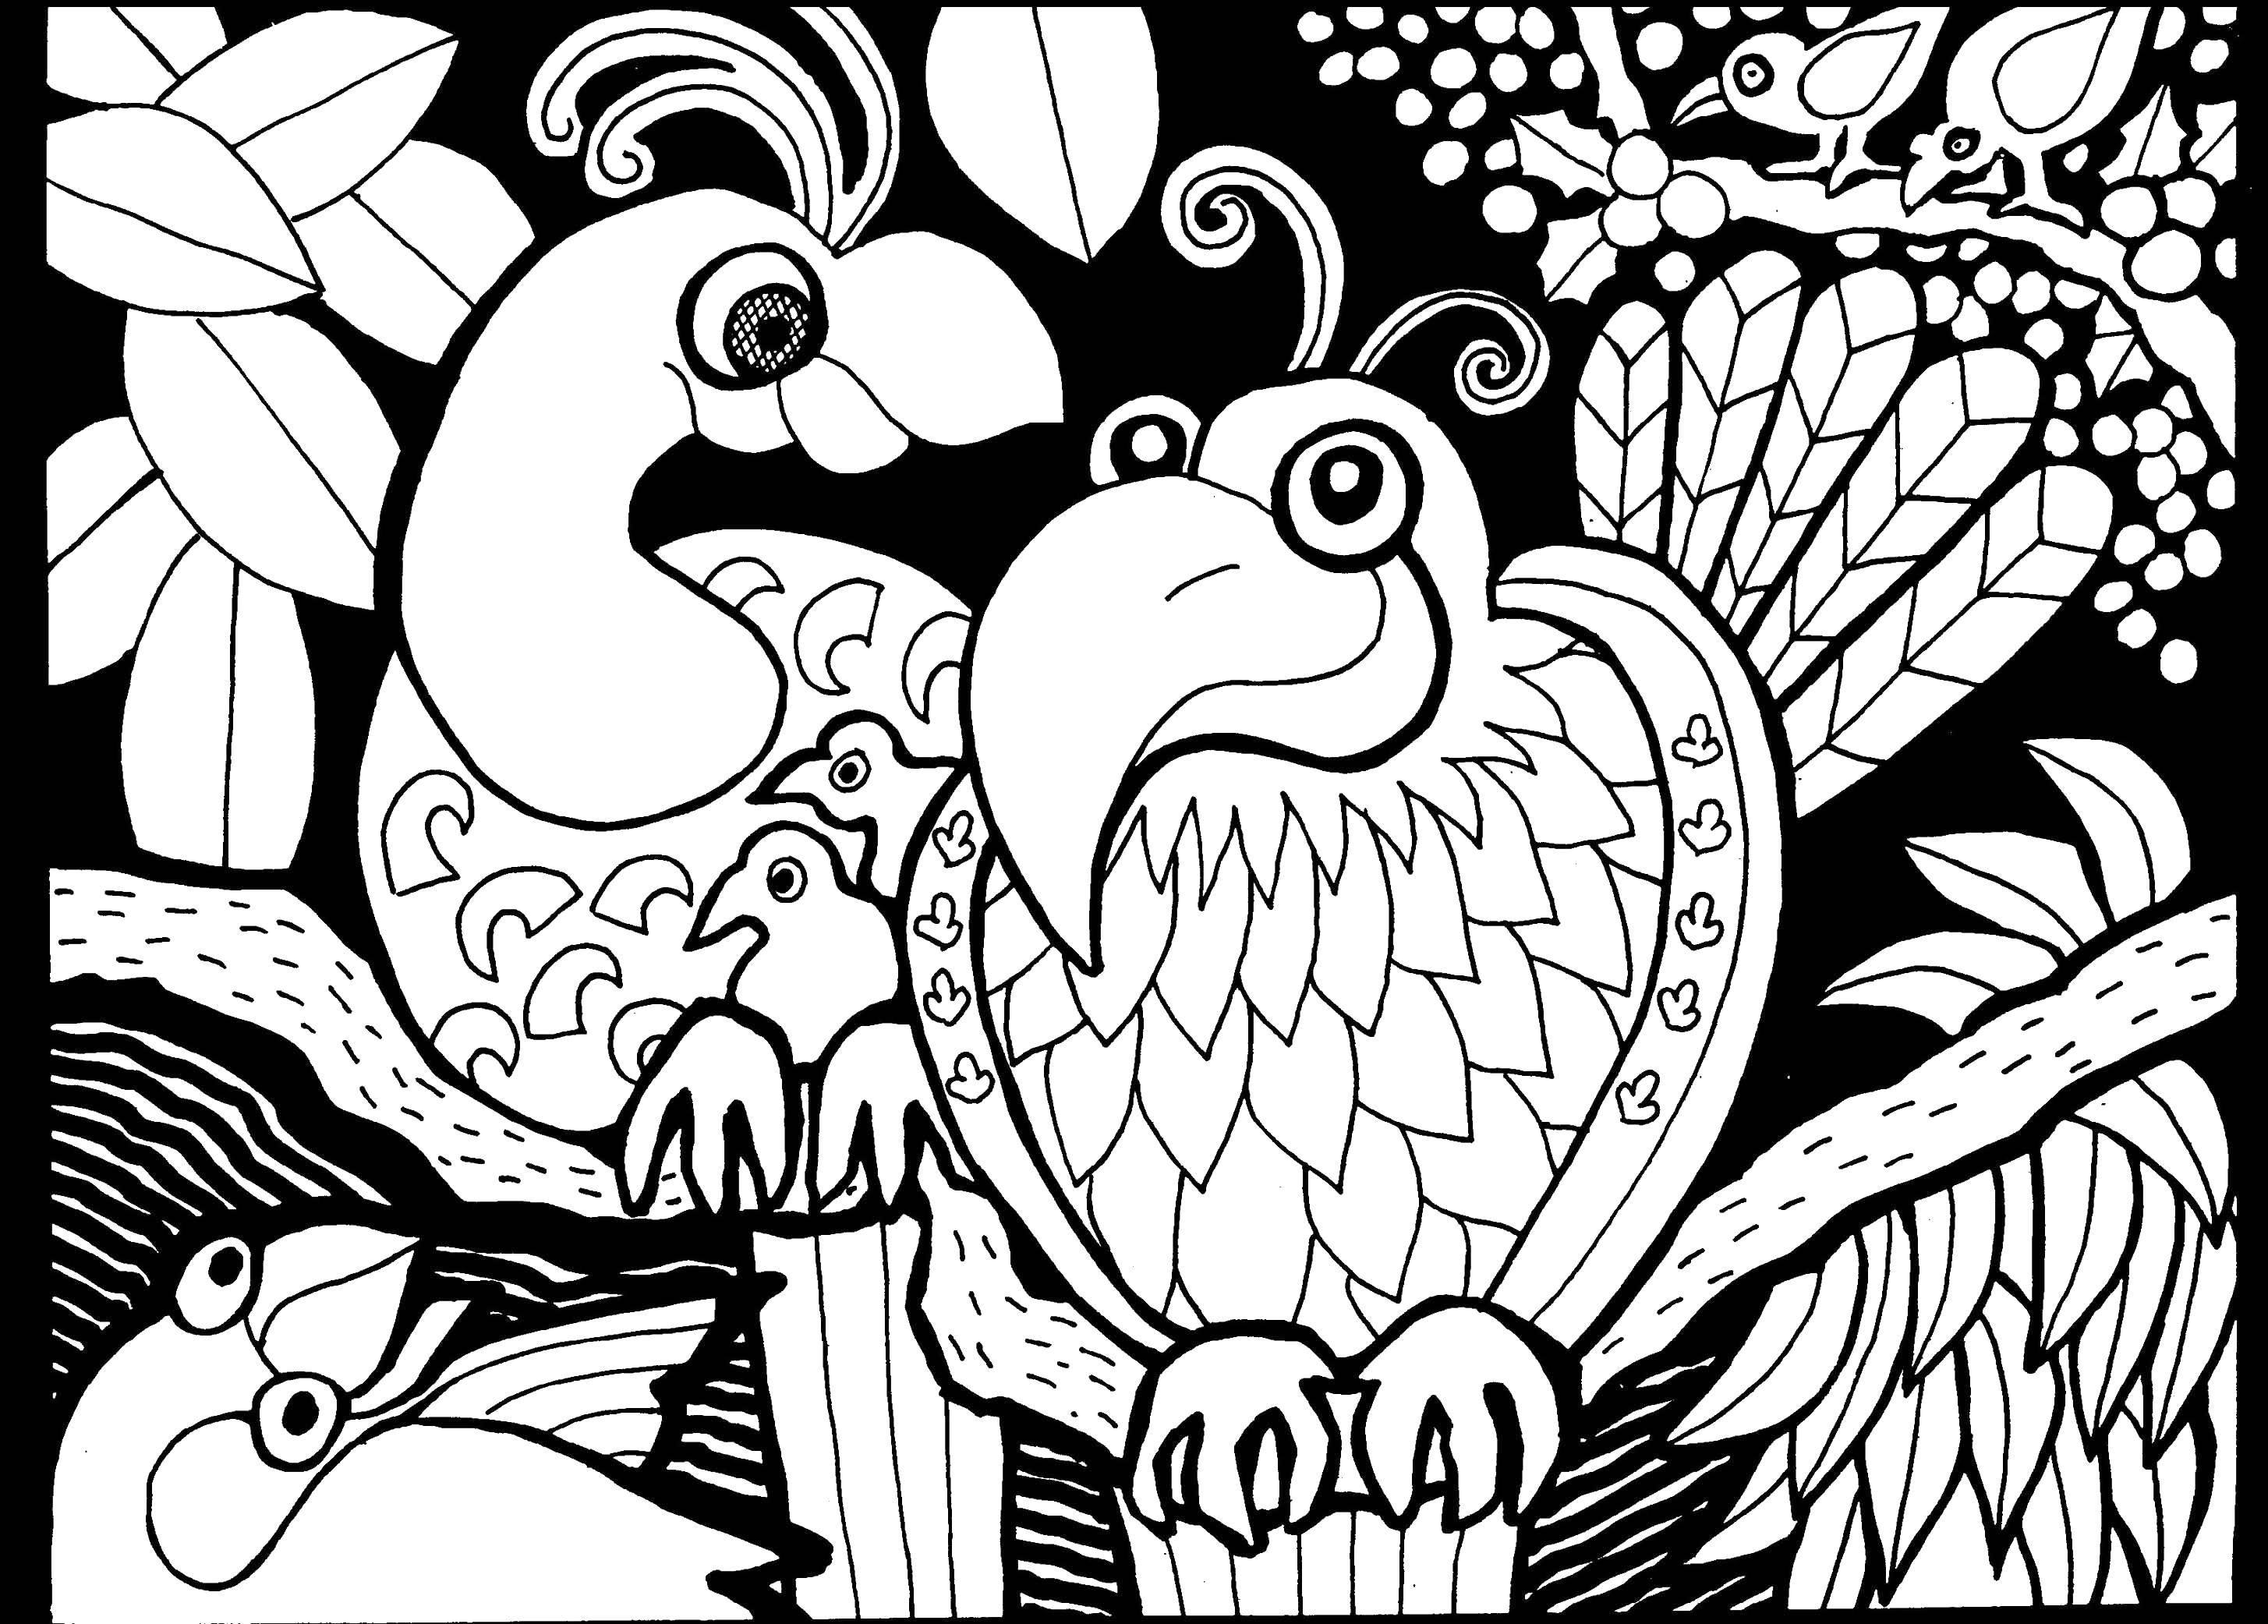 Coloring Birds and patterns. Category patterns. Tags:  patterns, birds, parrots.